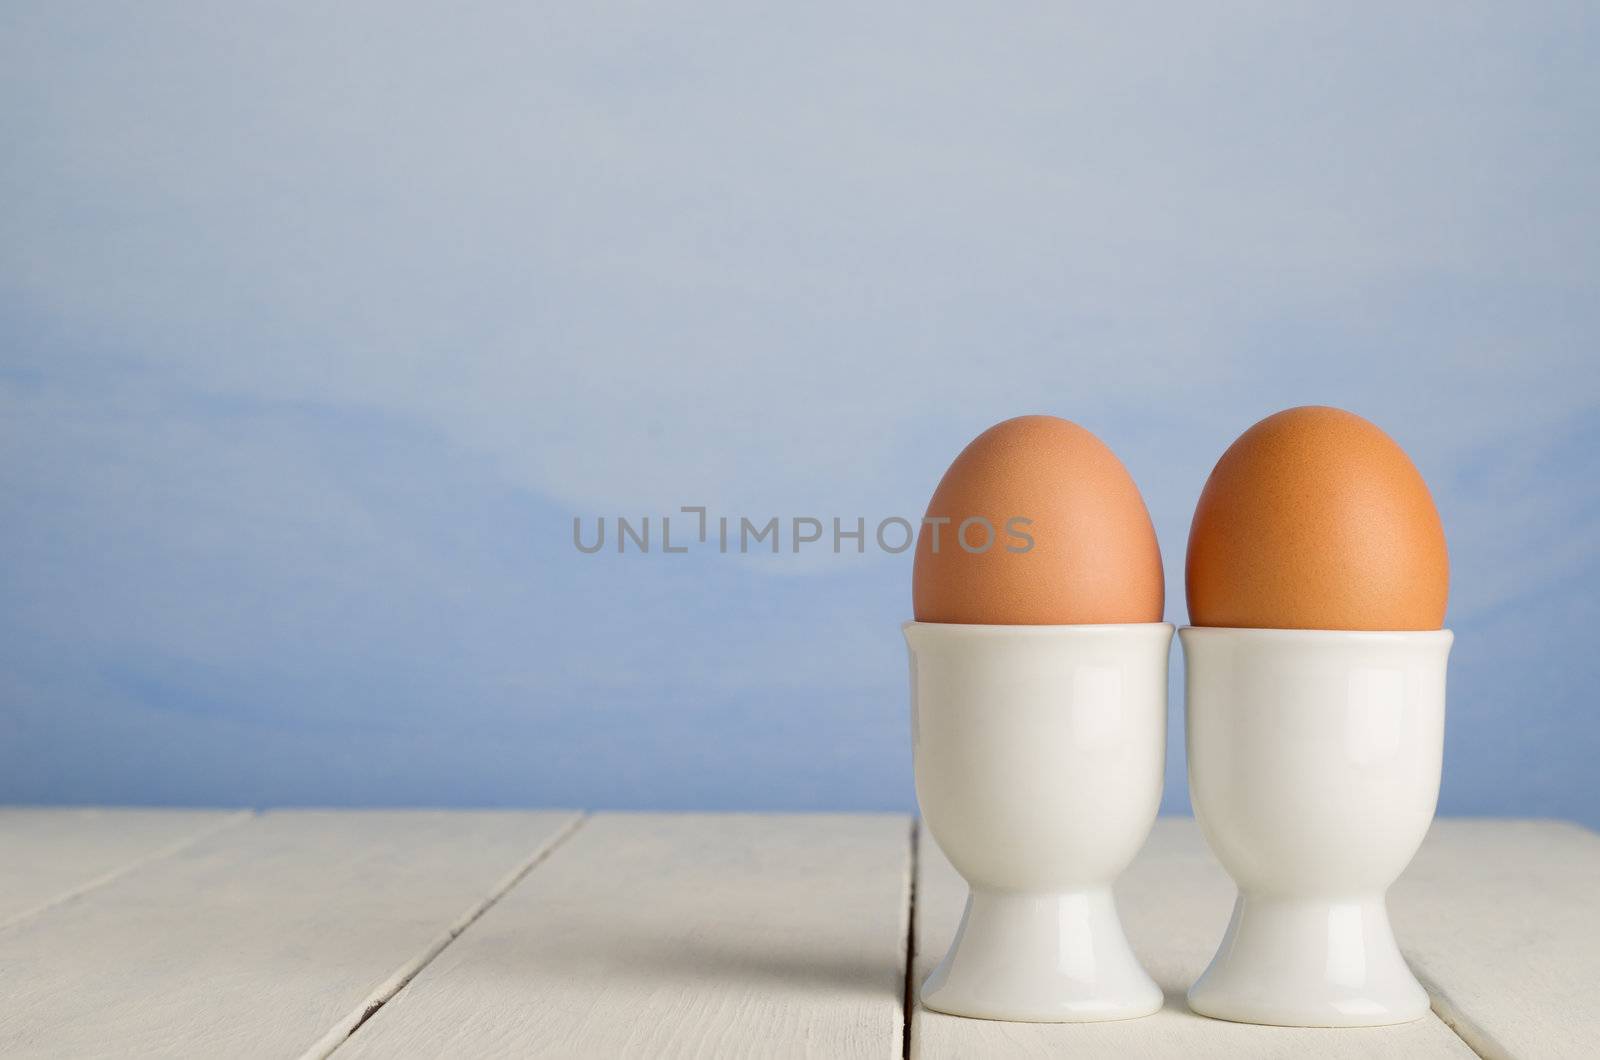 Two fresh brown undecorated eggs, side by side in white porcelain egg cups against a painted blue sky effect background, on an old cream painted wood plank farmhouse table.